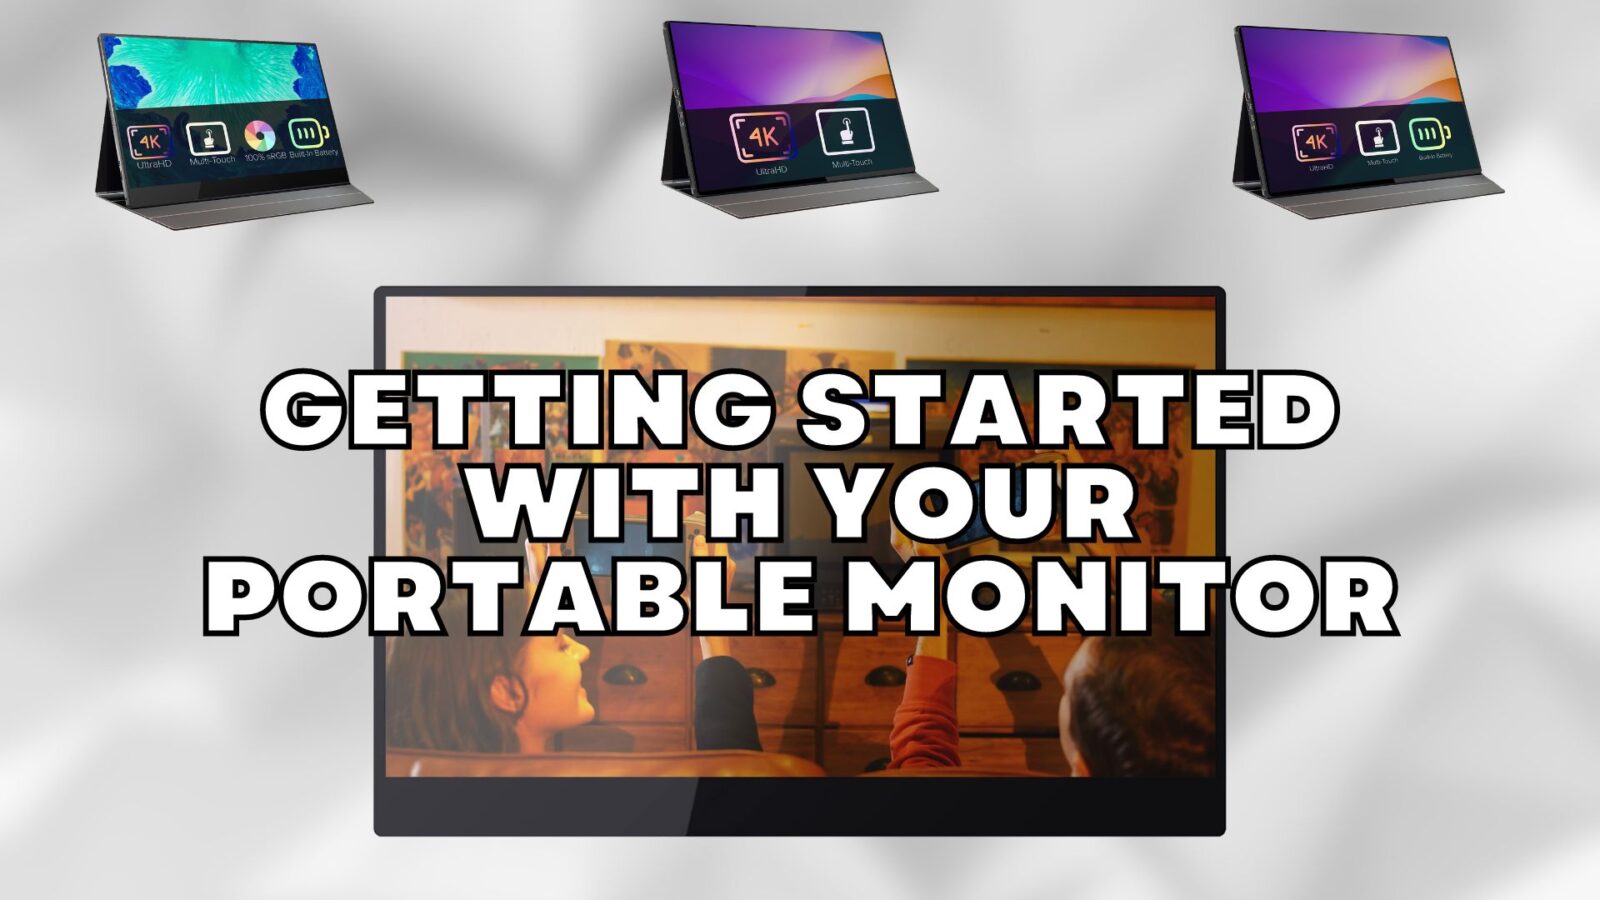 Getting started with your portable monitor